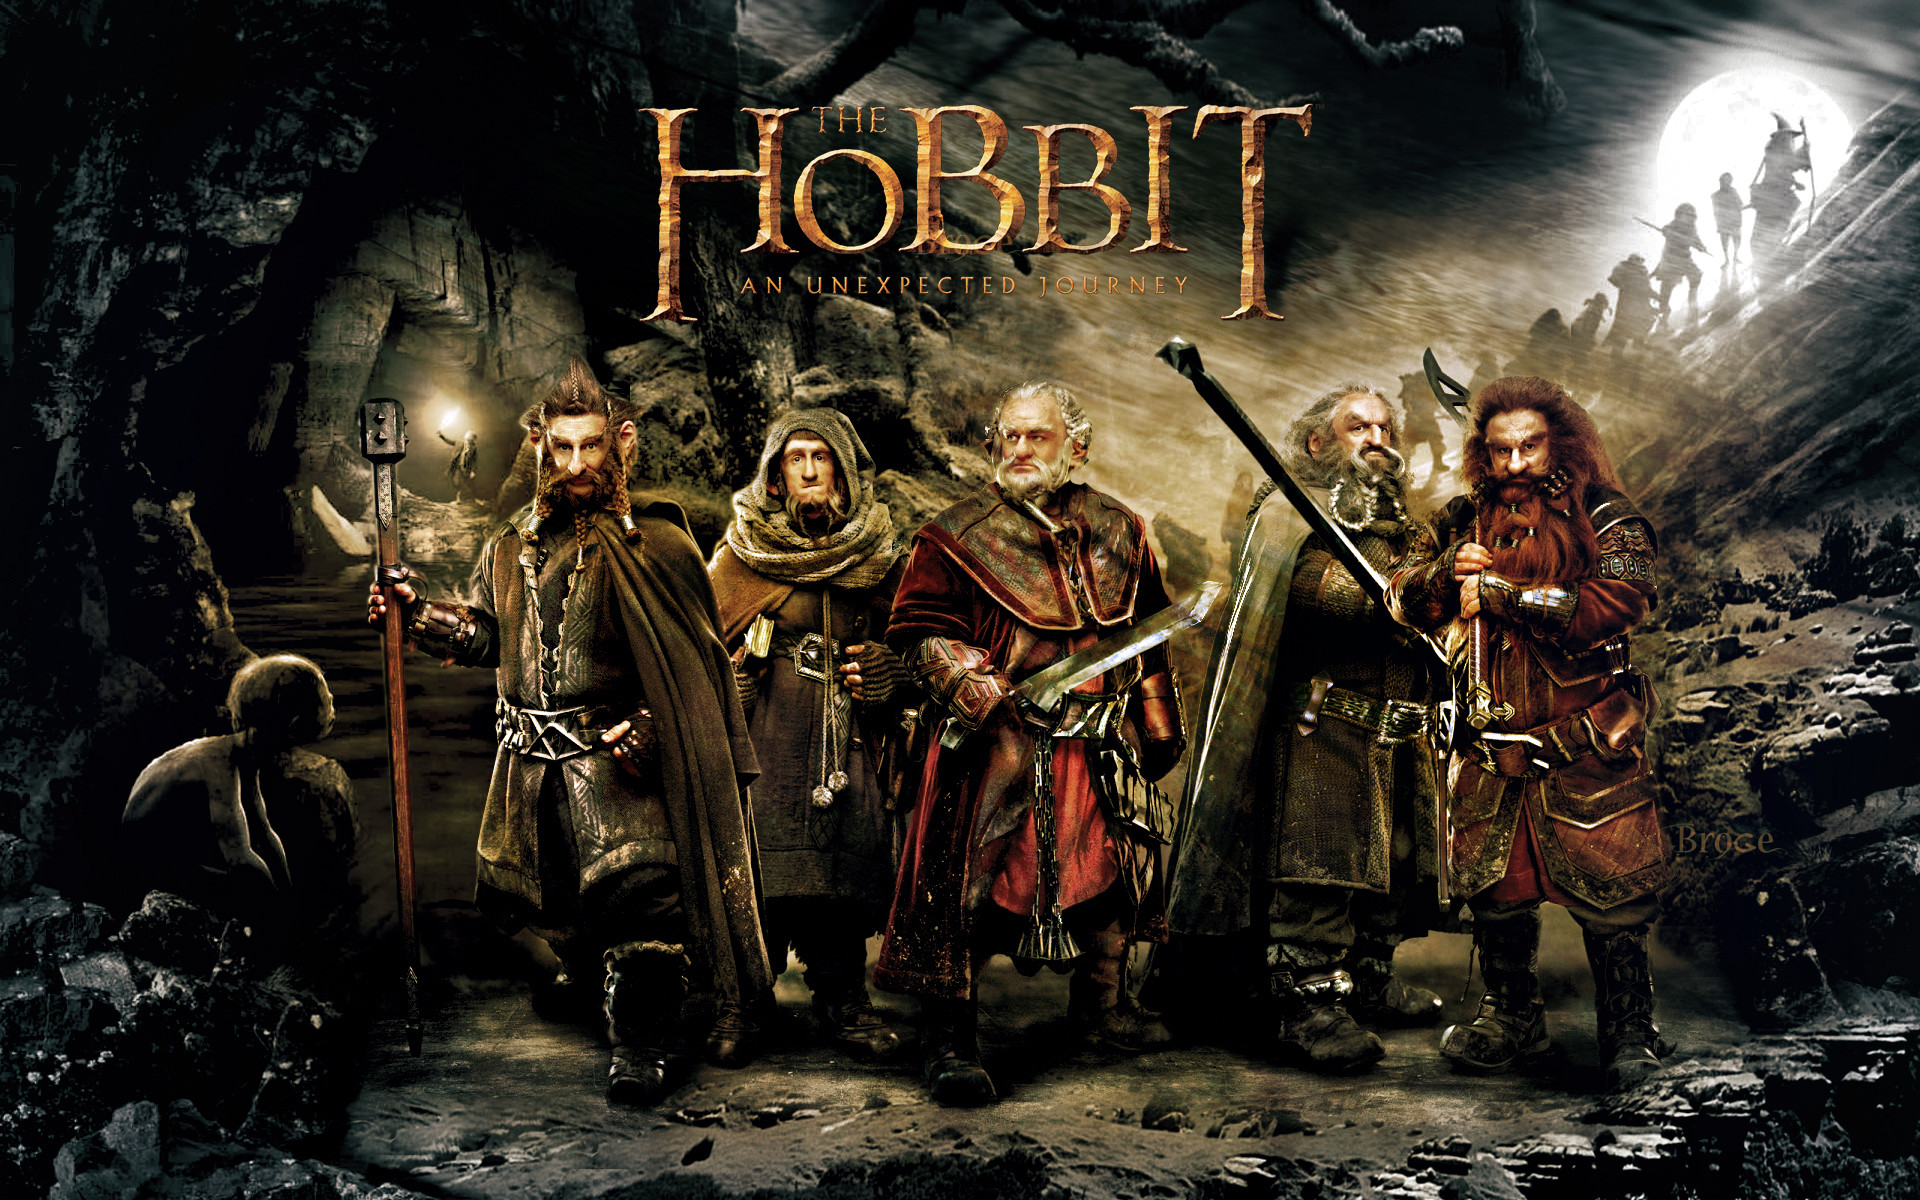 The Hobbit The Desolation of Smaug 4k Ultra HD Wallpaper